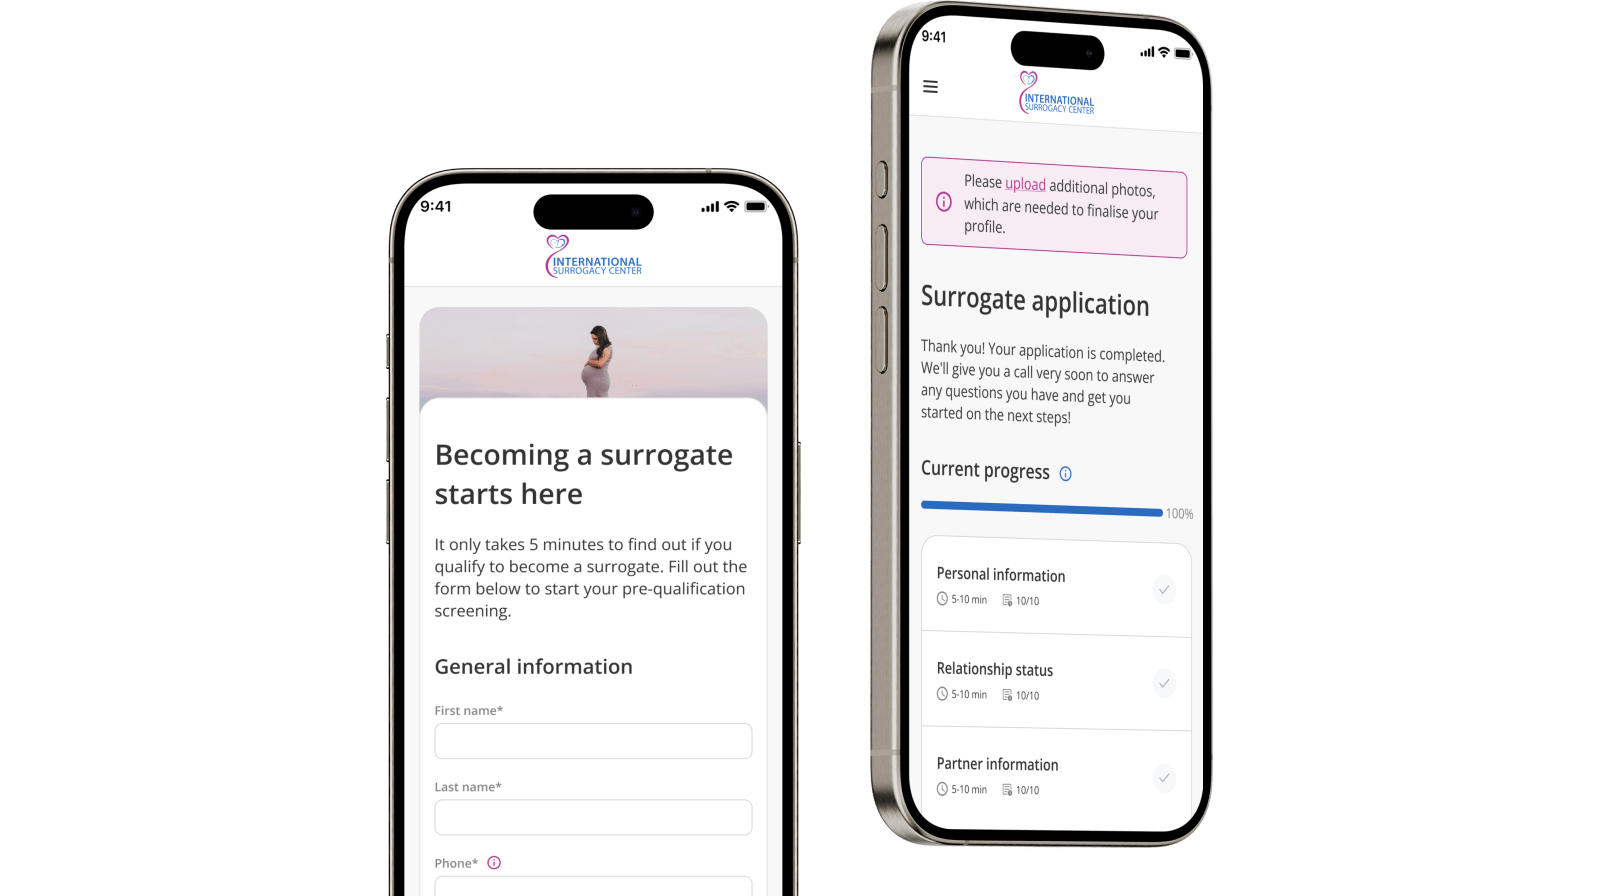 Surrogate mother application form in a healthcare app by MindK